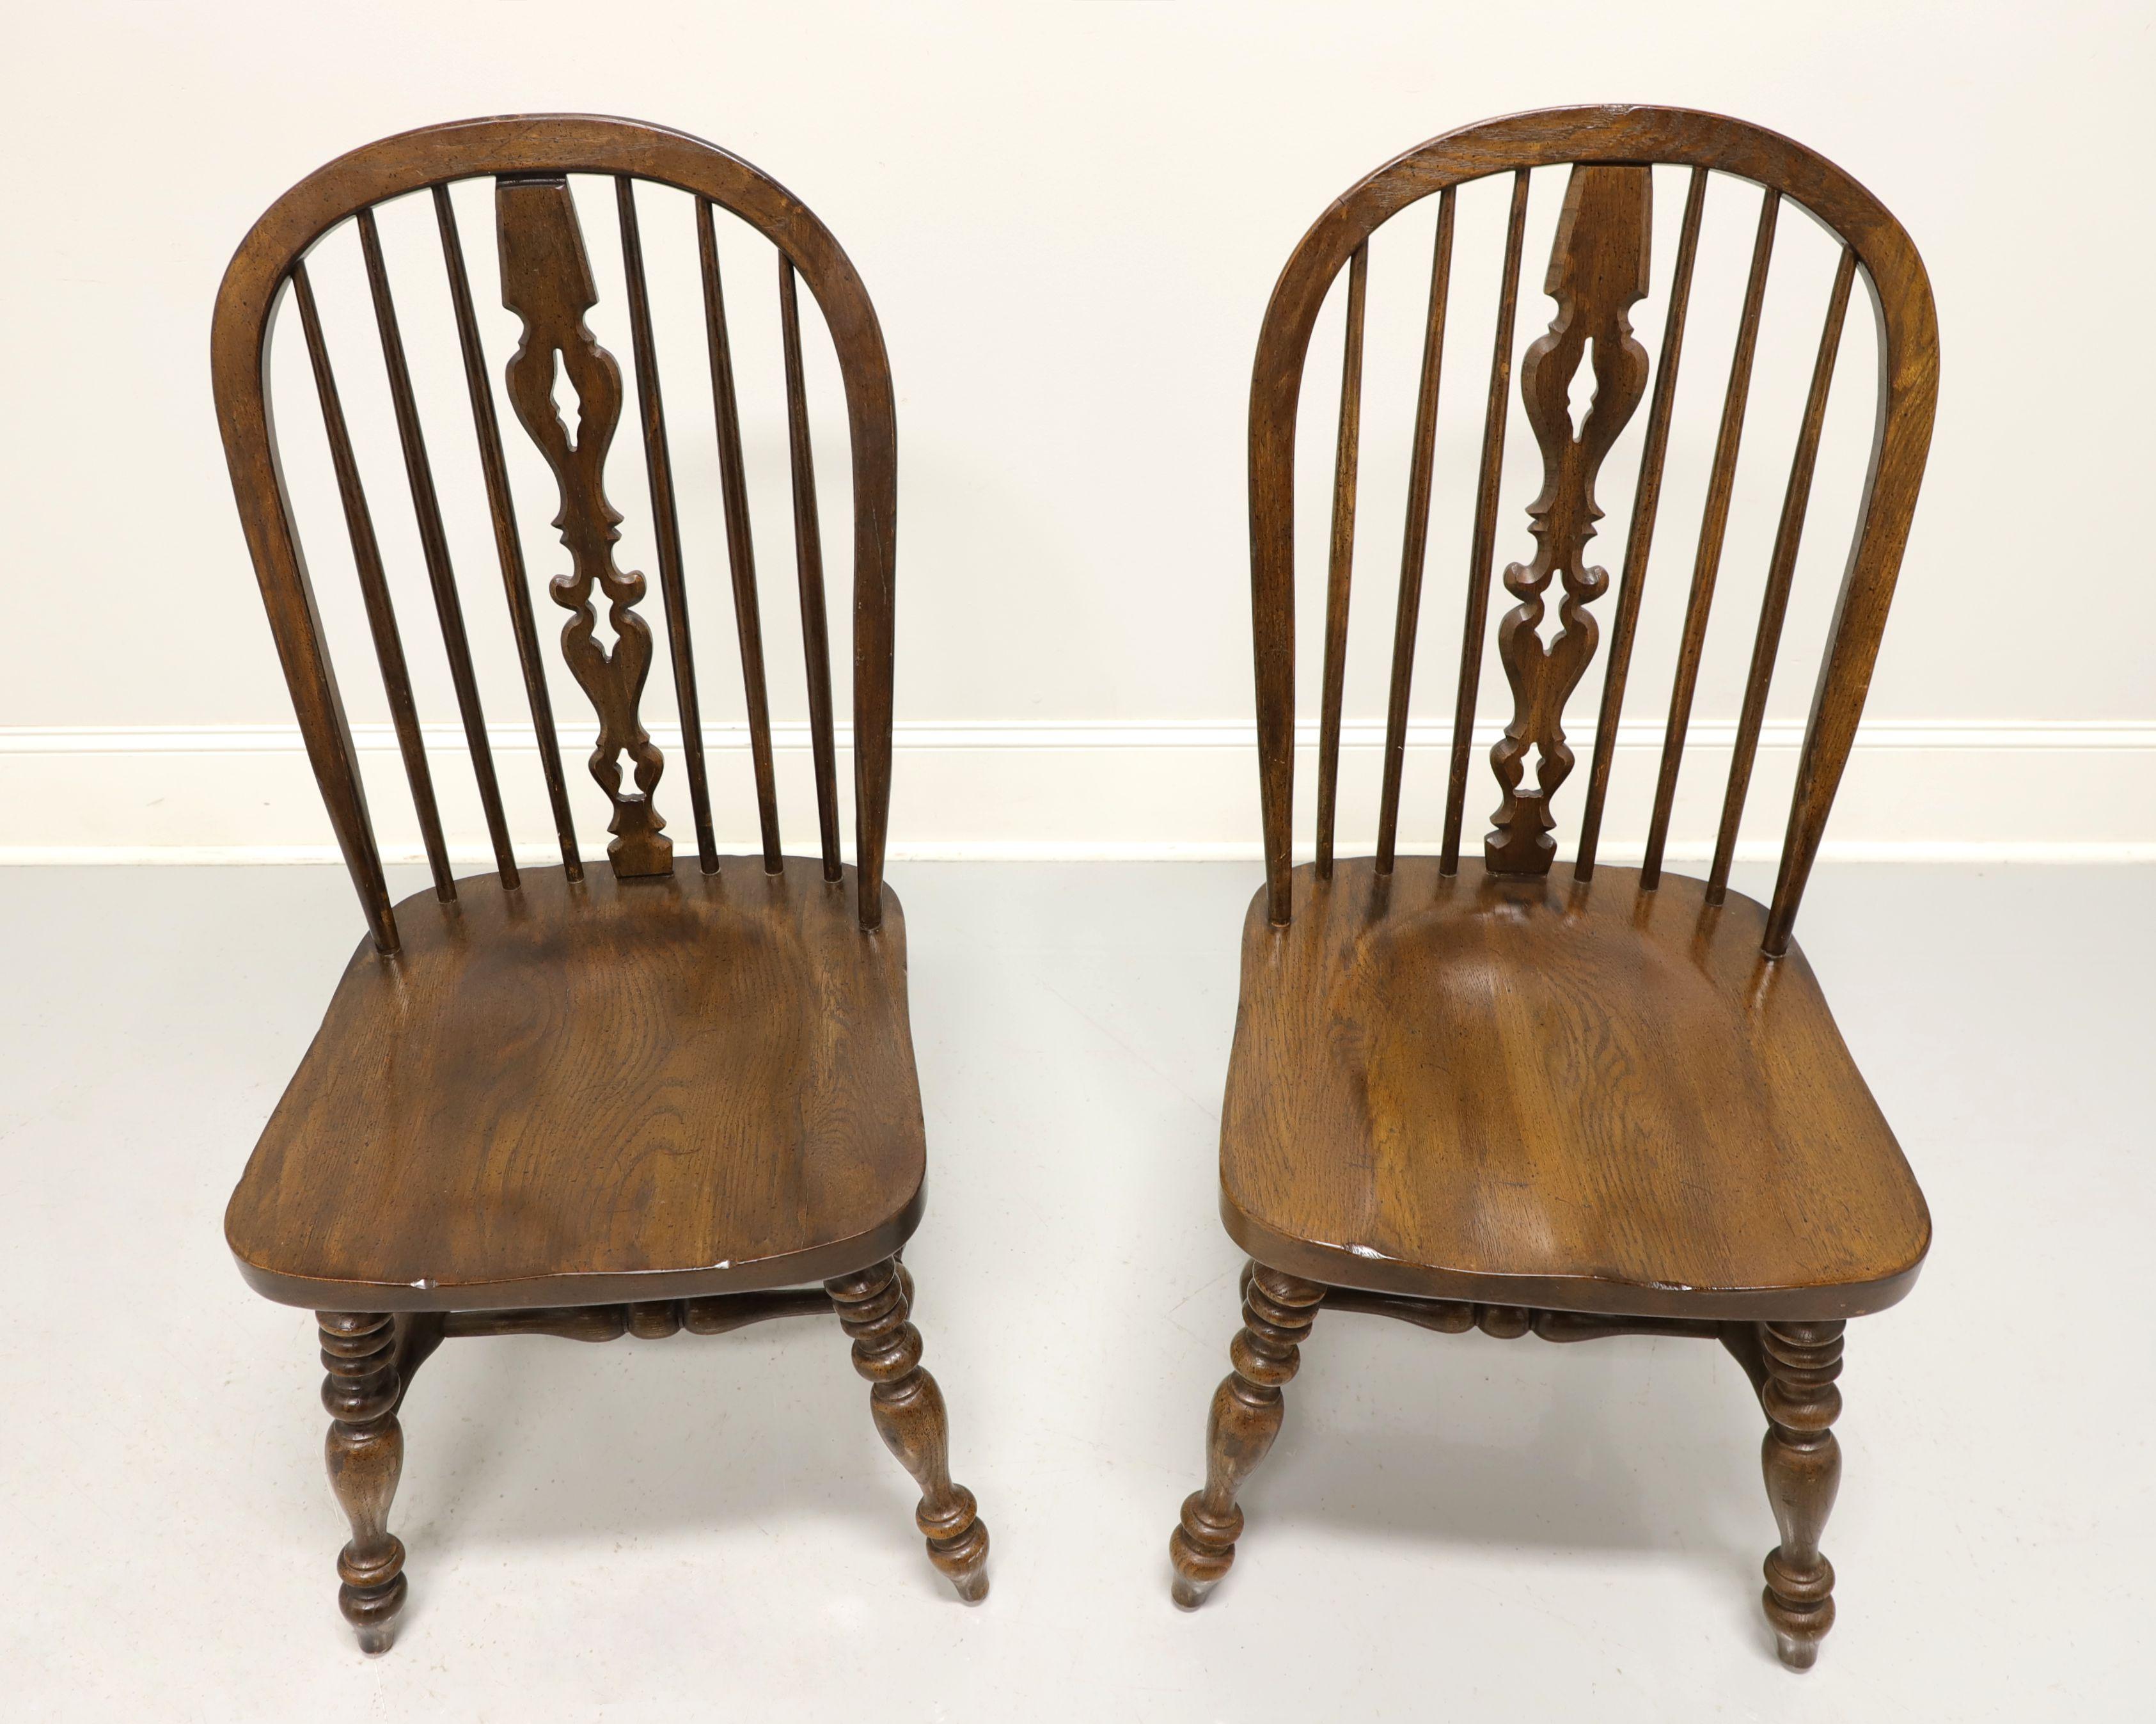 A pair of Windsor style dining side chairs by Ethan Allen, from their Royal Charter collection. Solid oak with bowback, spindle back with carved center backsplat, turned legs and stretchers. Made in the USA, in the late 20th century. 

Measures: